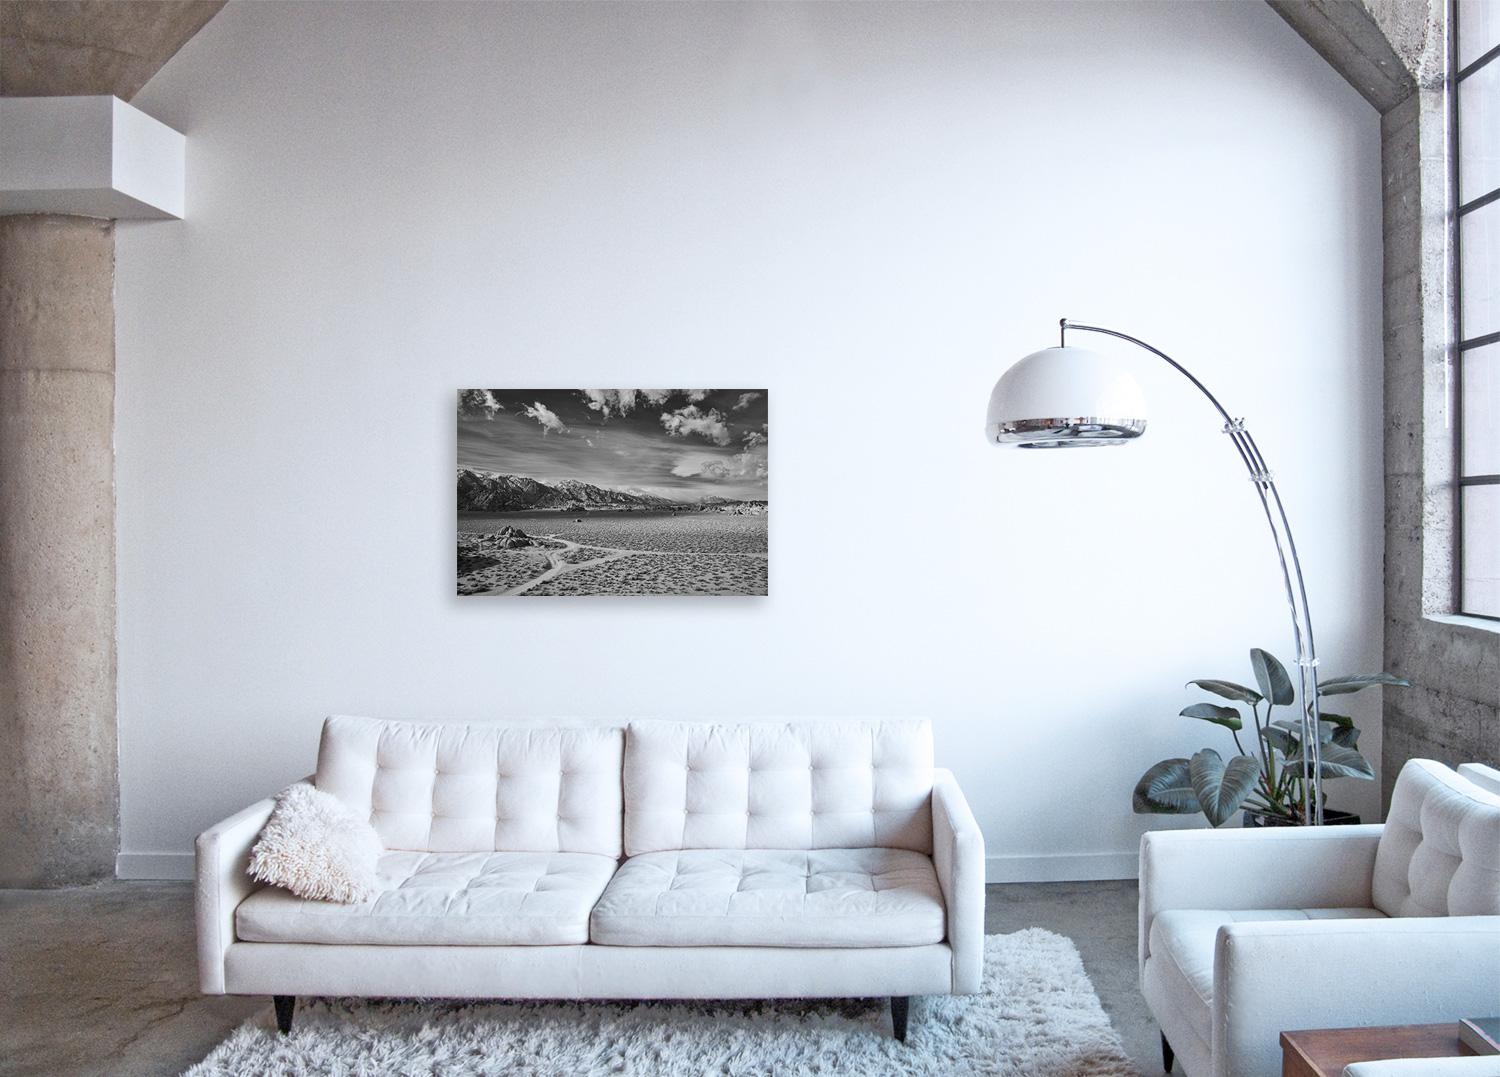 Desert Crossing - large scale photograph of dramatic desert landscape - Contemporary Photograph by Frank Schott